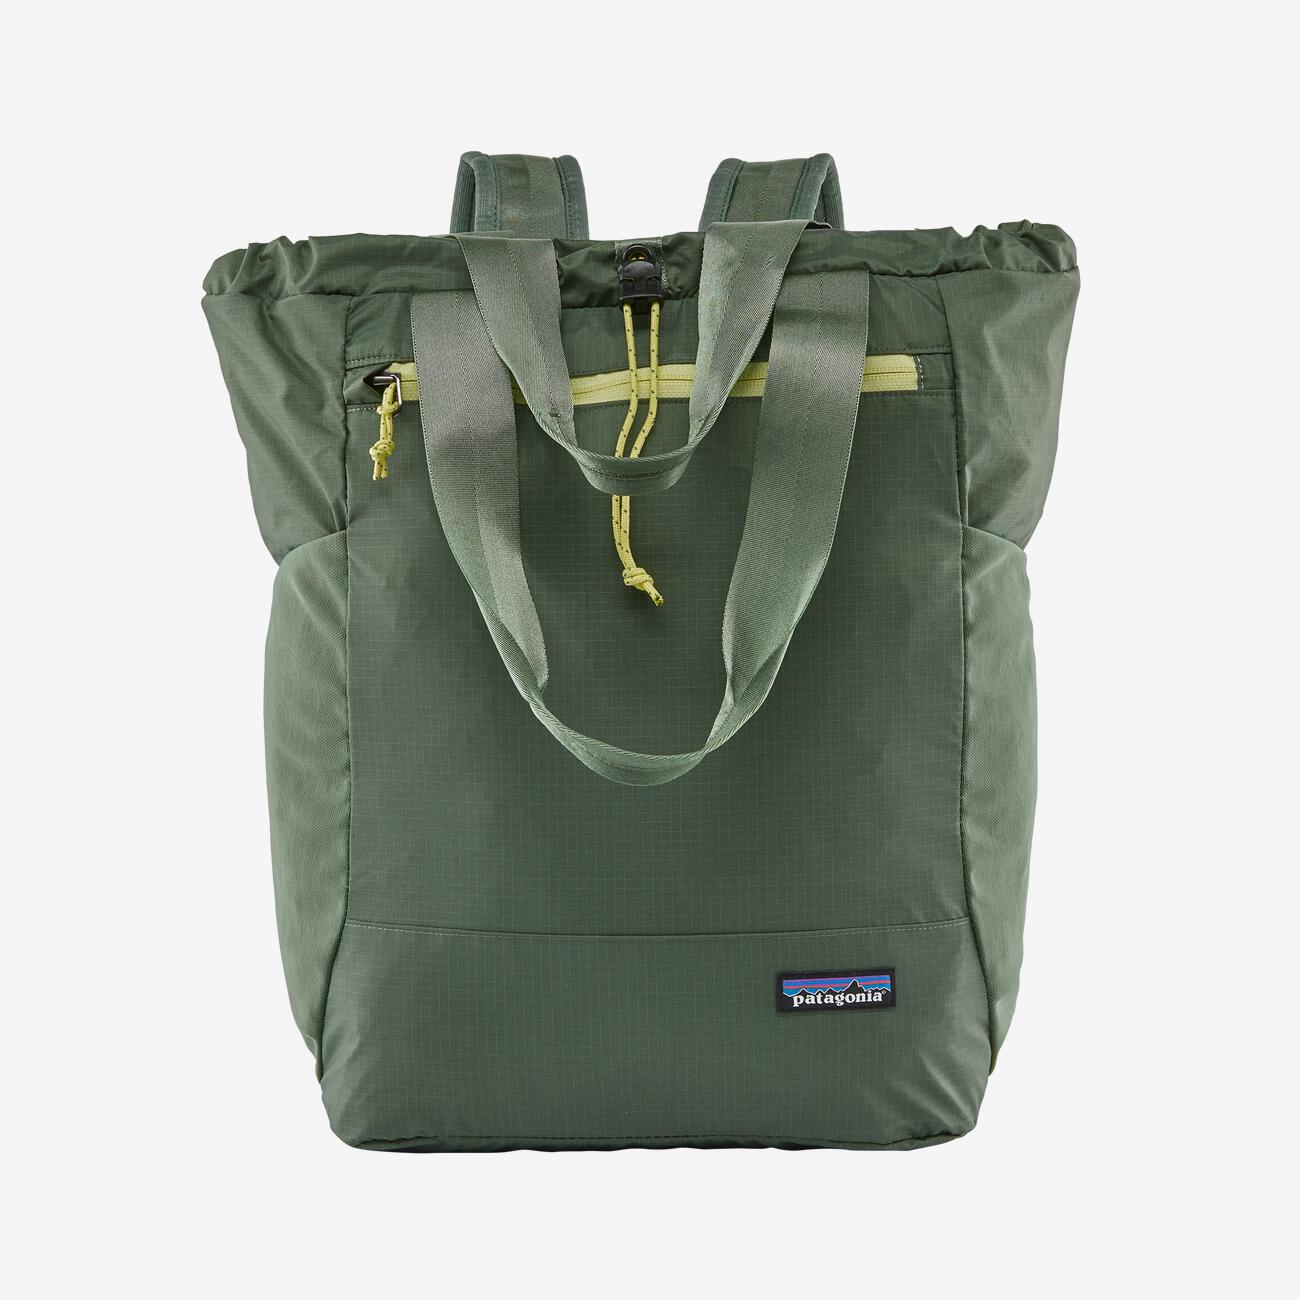 Patagonia Ultralight Travel Tote Review